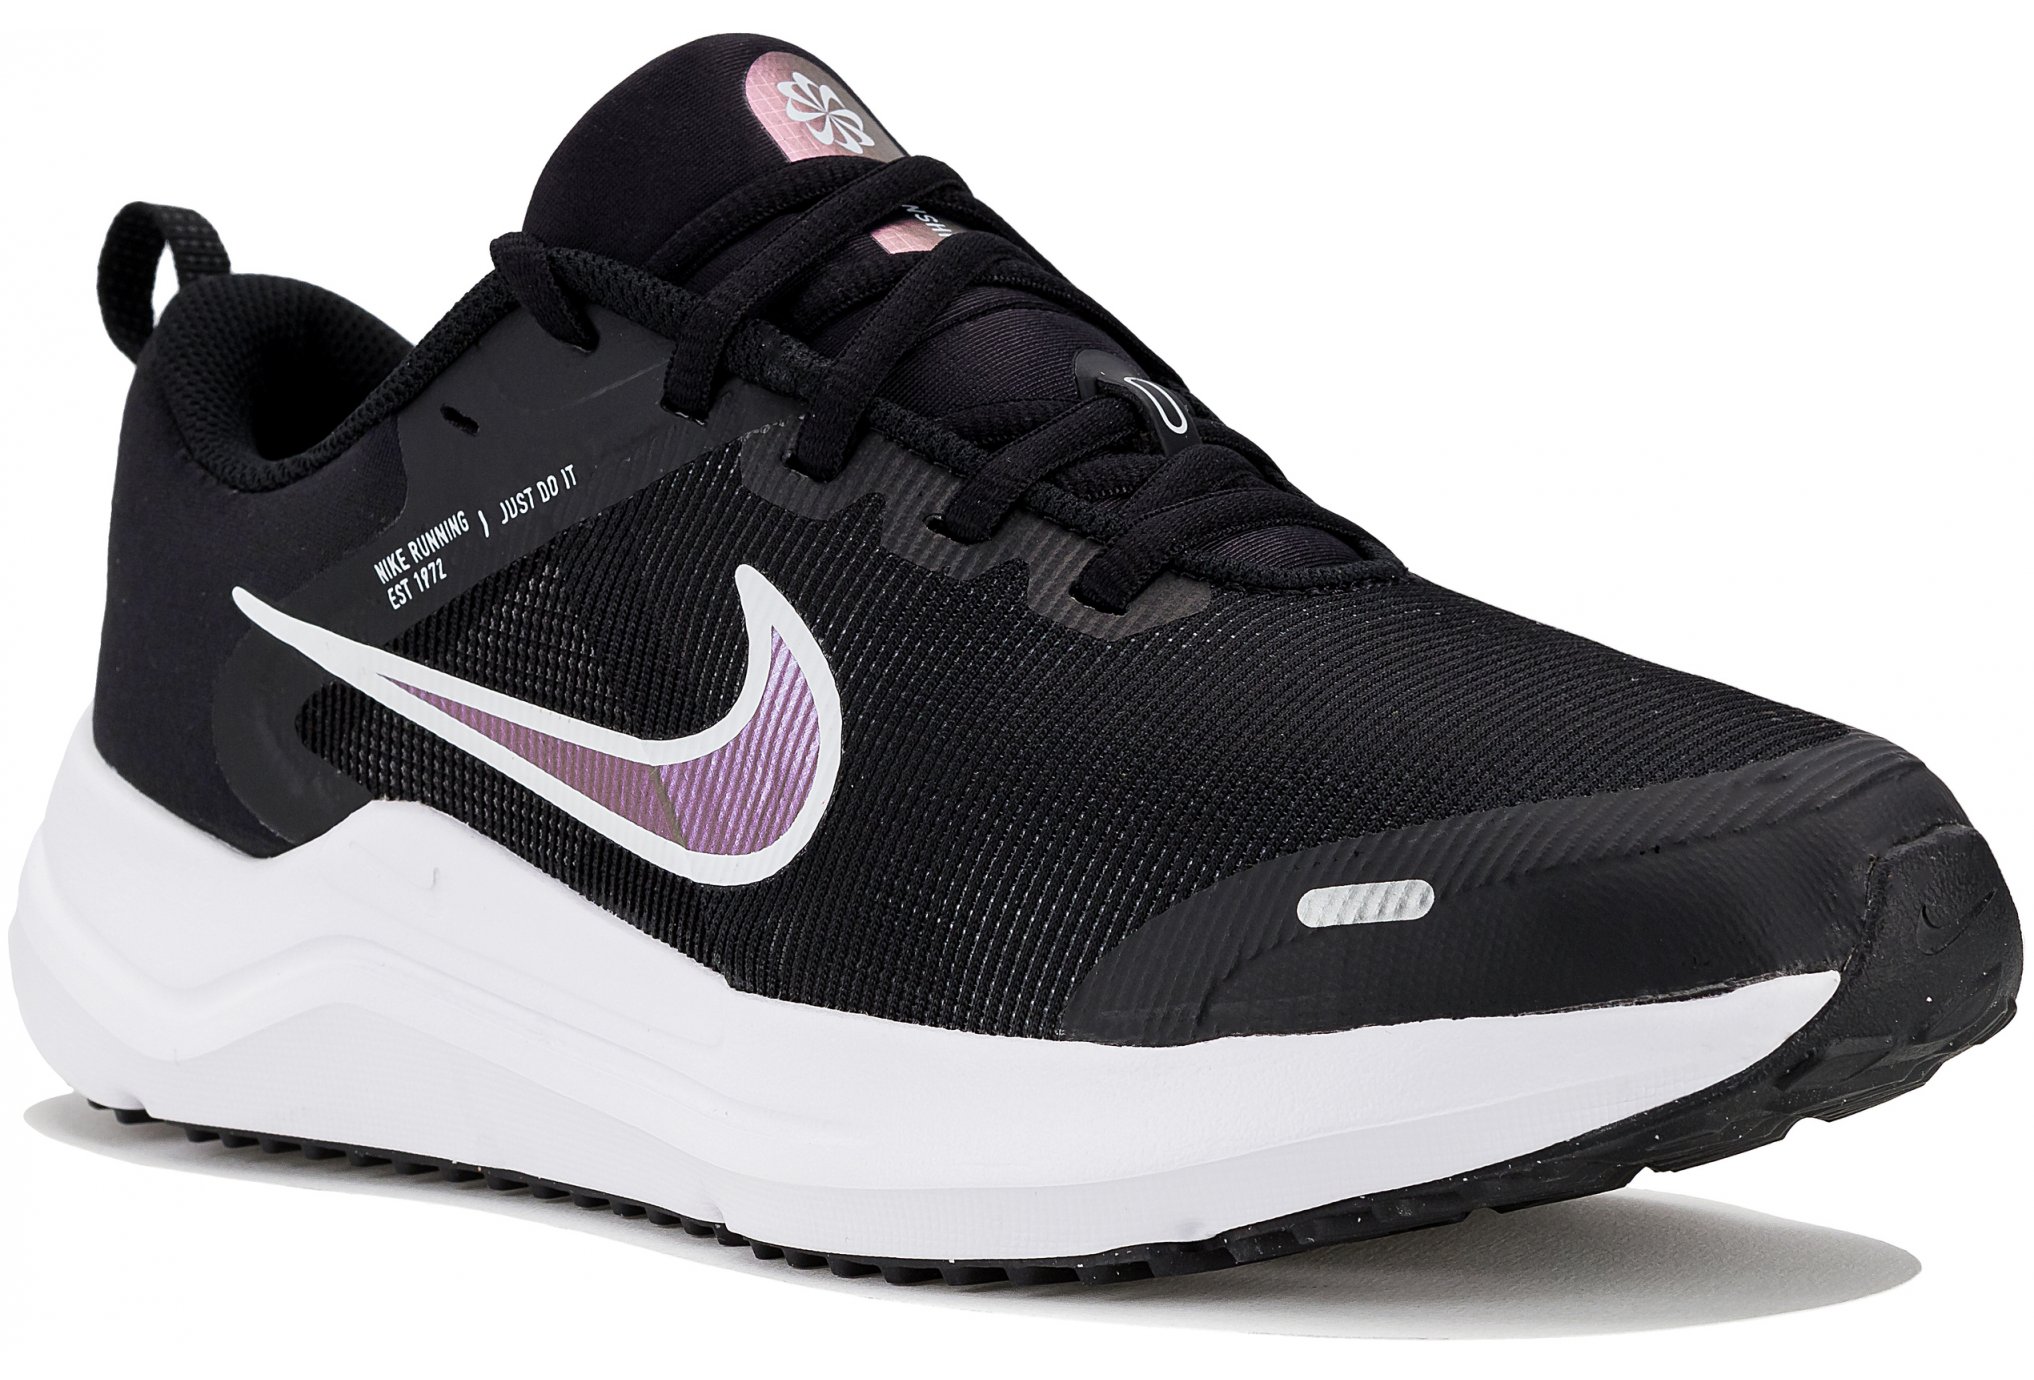 Nike Downshifter 12 Fille Chaussures running femme